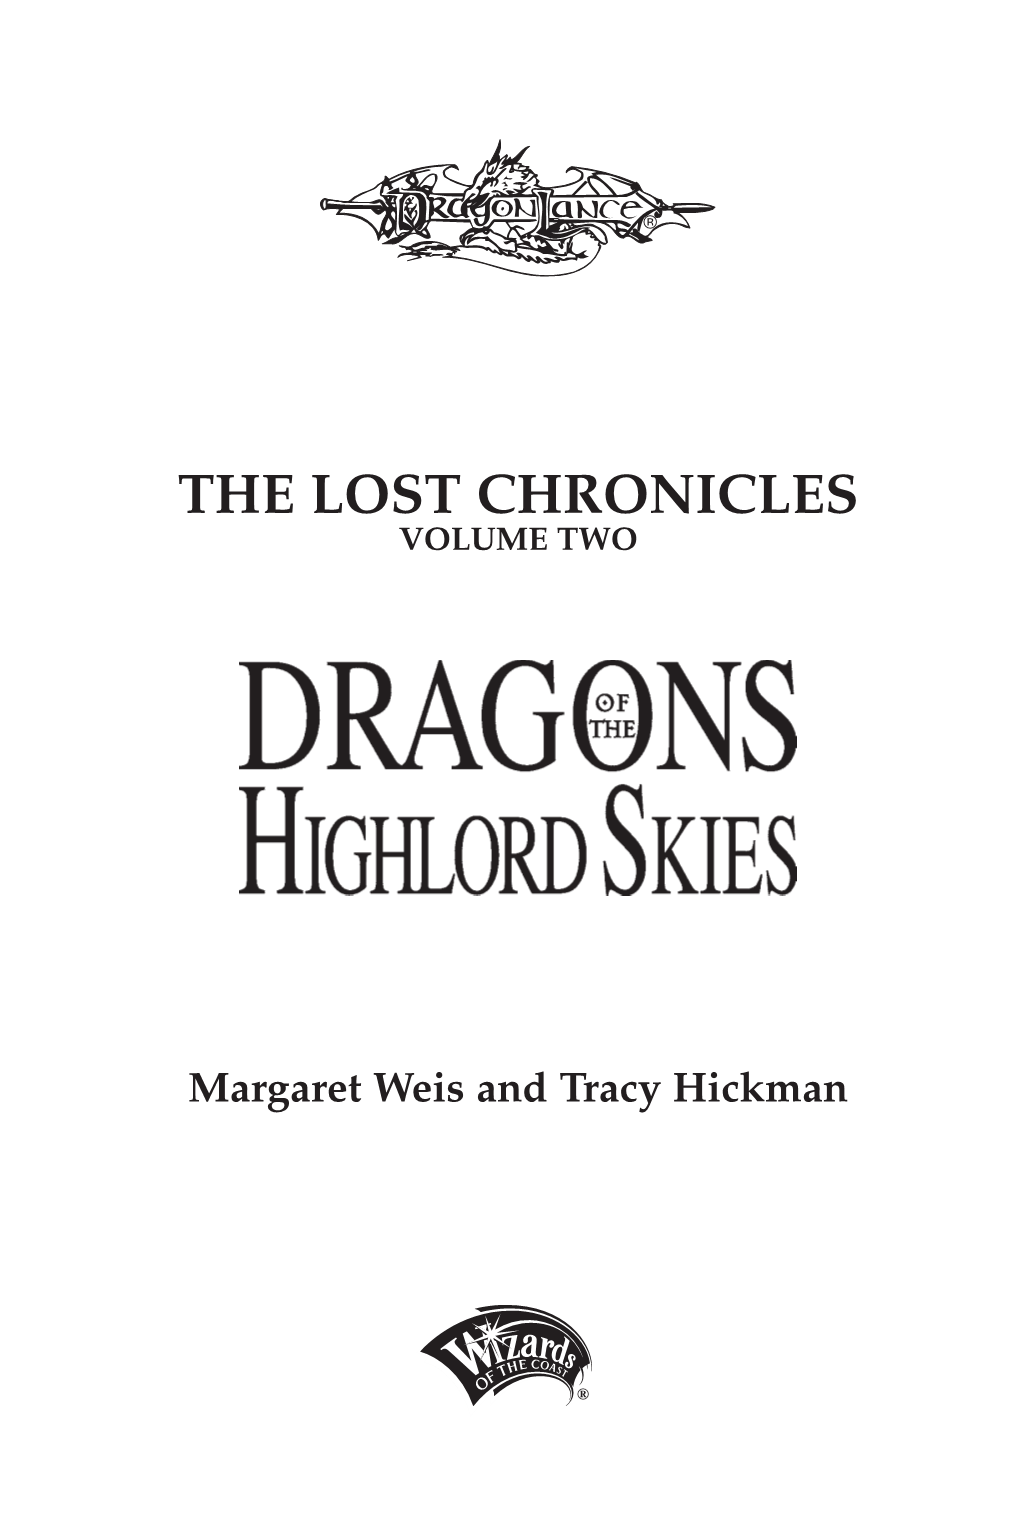 THE LOST CHRONICLES Volume Two